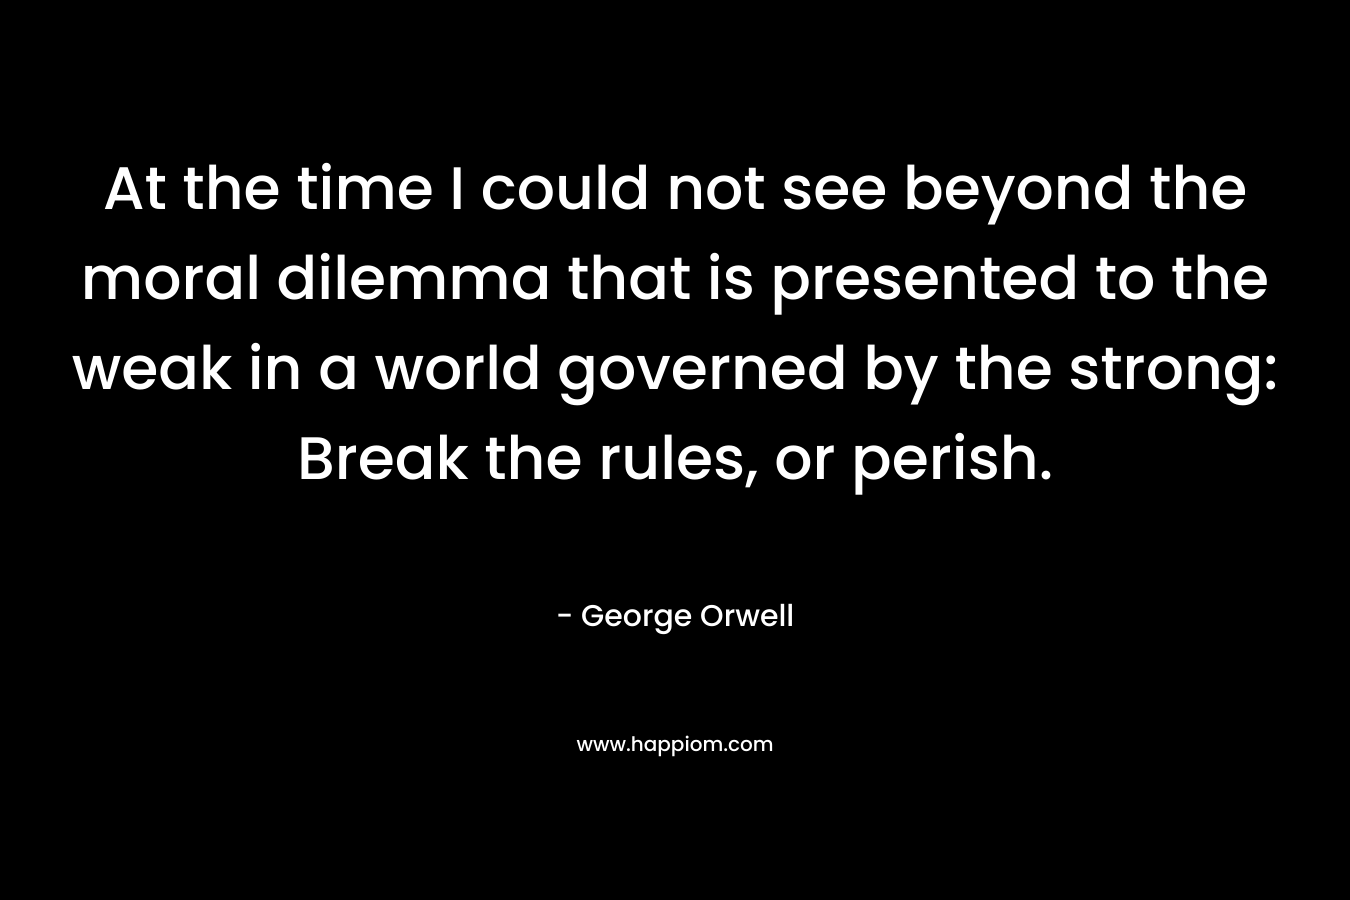 At the time I could not see beyond the moral dilemma that is presented to the weak in a world governed by the strong: Break the rules, or perish. – George Orwell